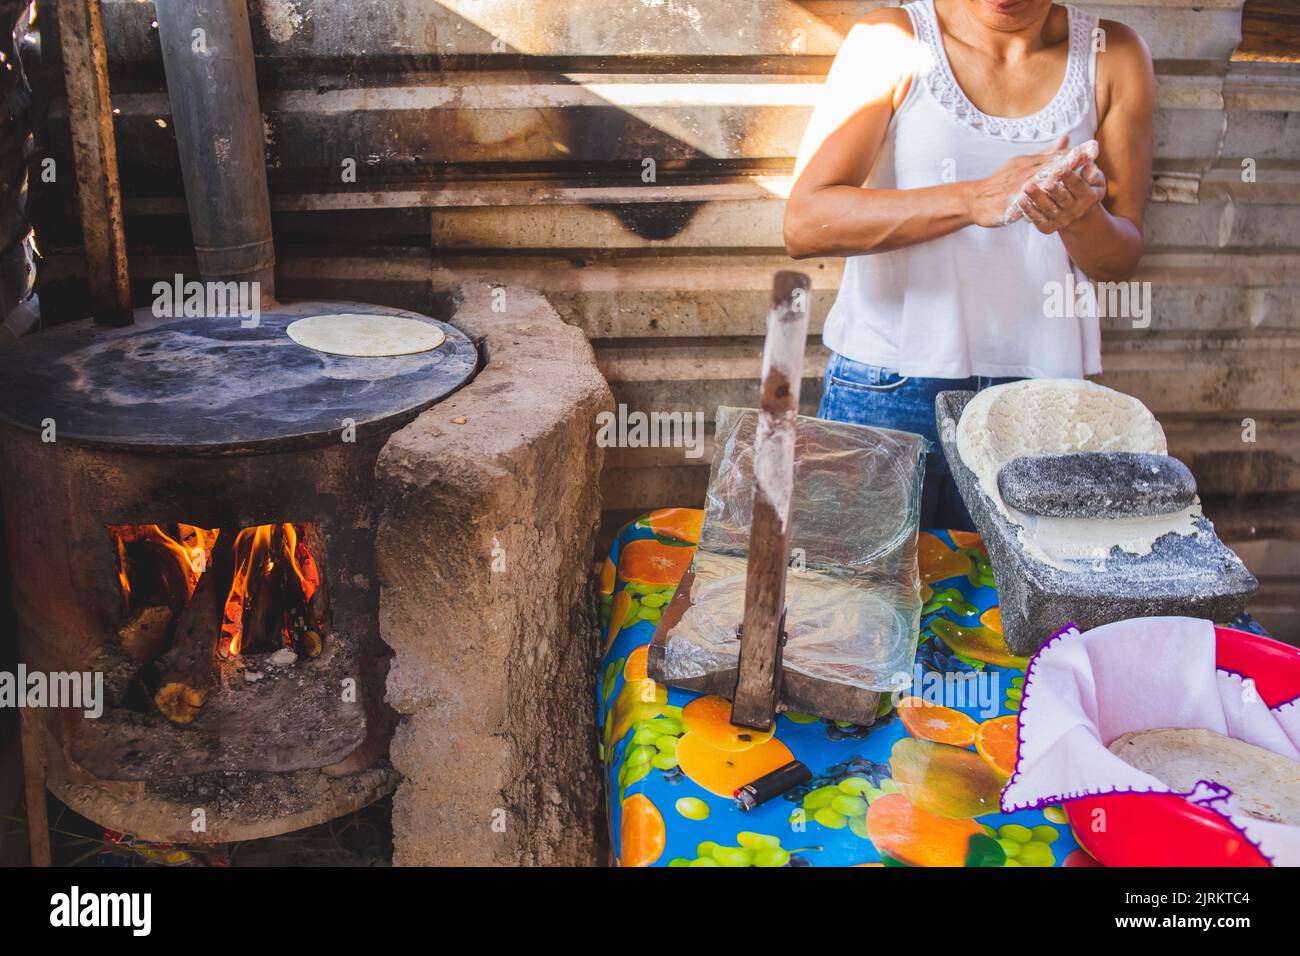 A Mexican woman torturing corn dough on a metate and a wood stove to make homemade tortillas Stock Photo